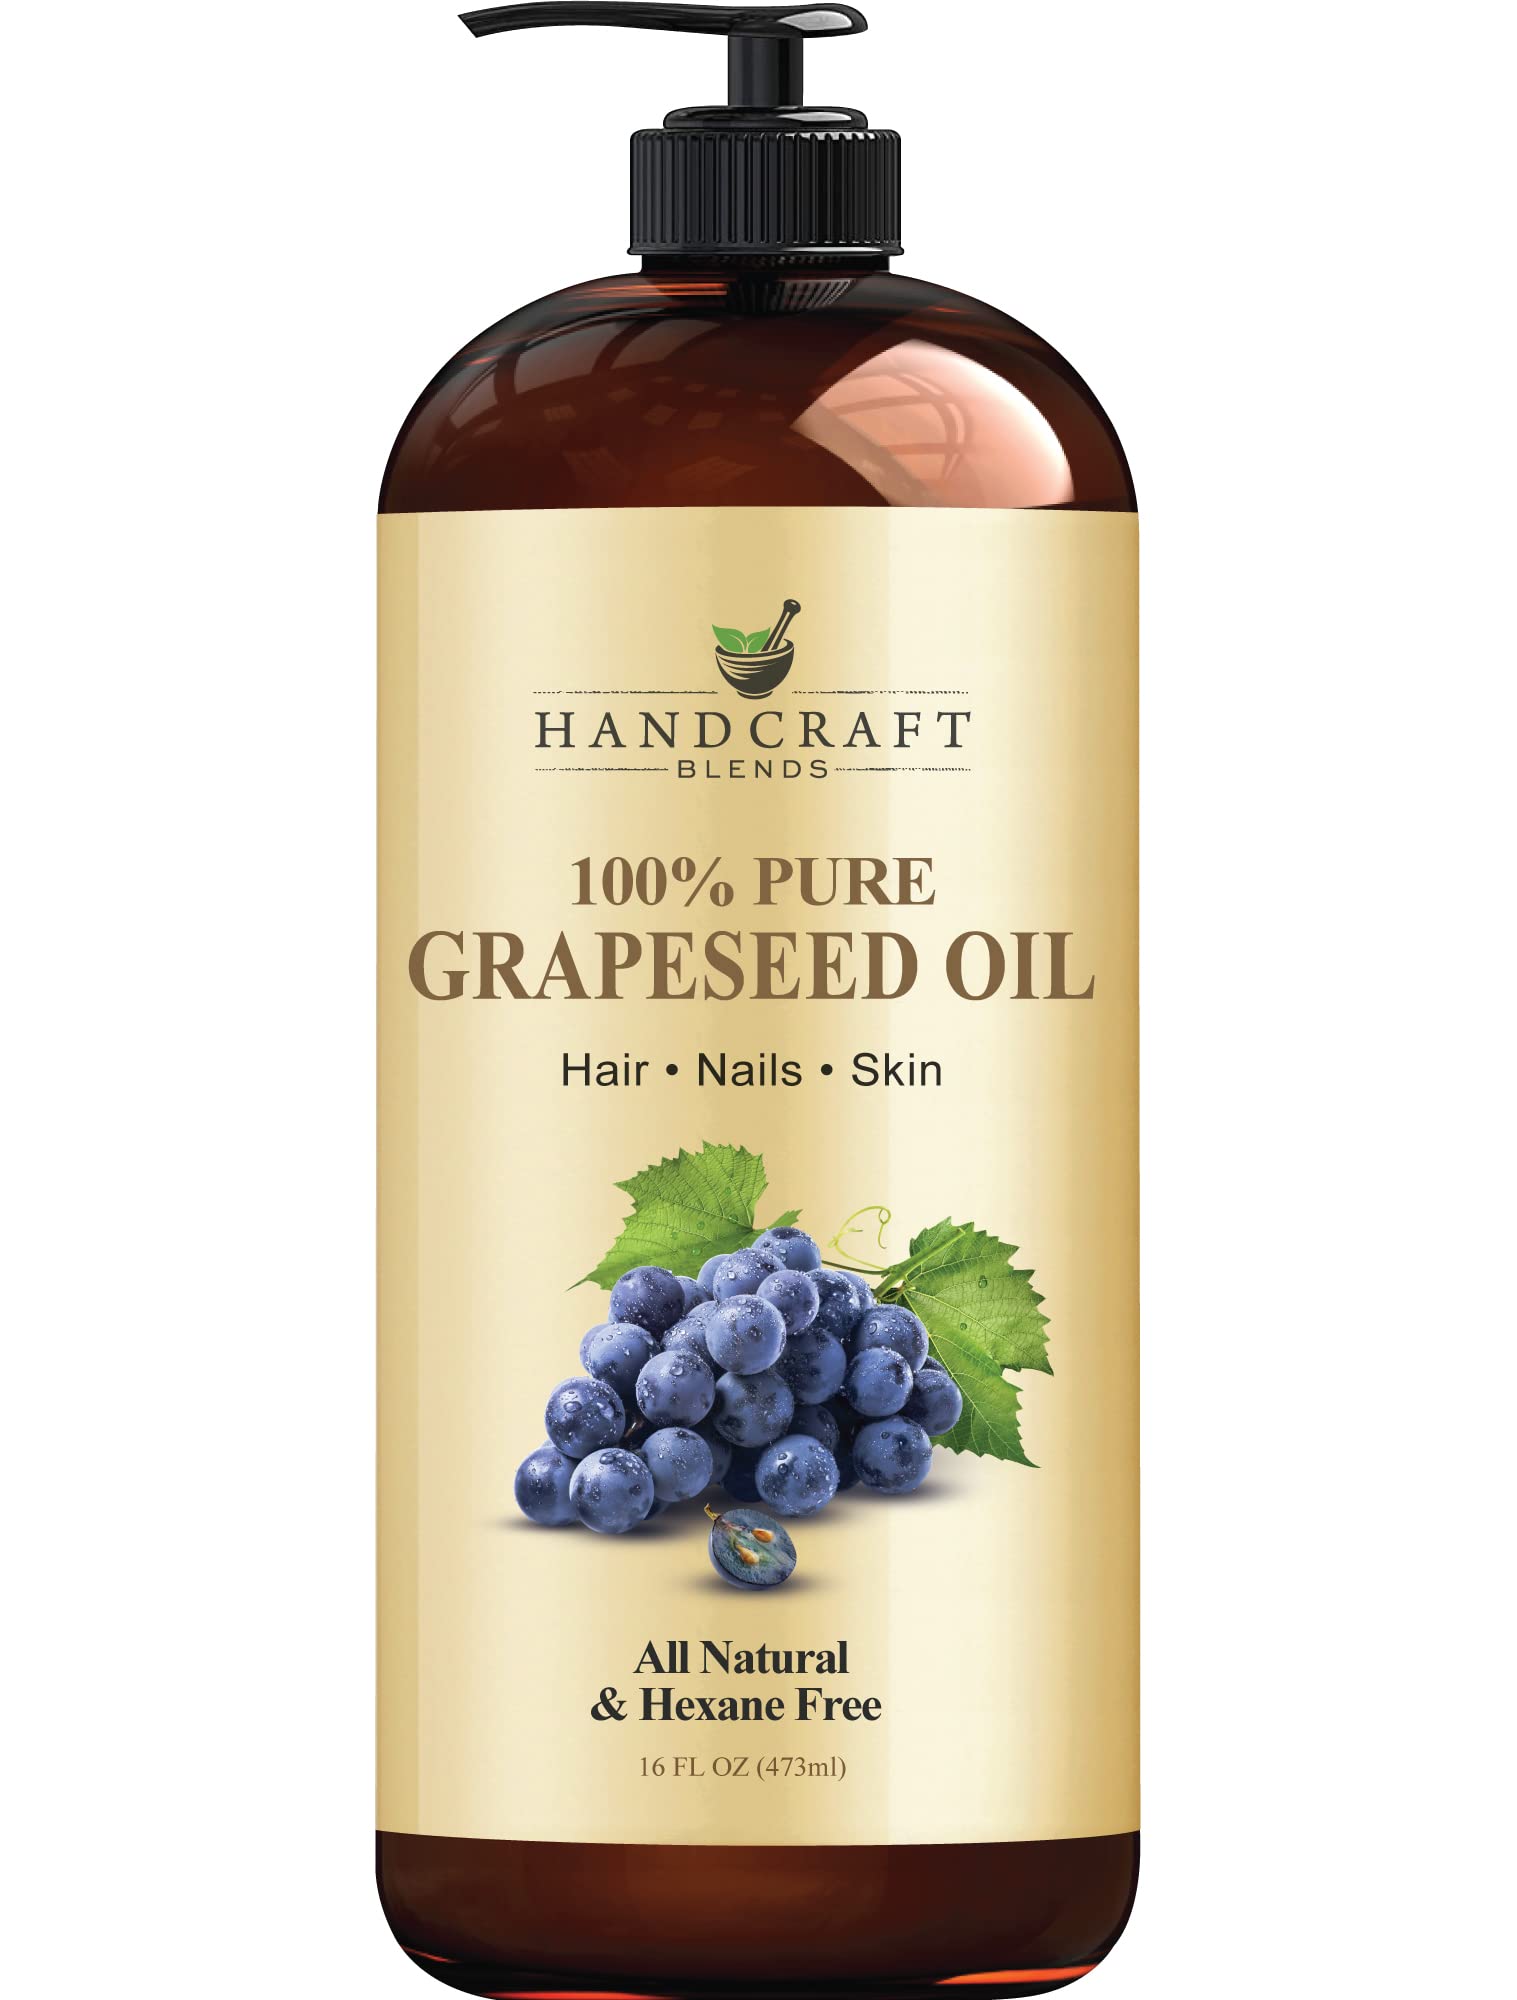 Handcraft Blends Grapeseed Oil - 100% Pure and Natural - Premium Therapeutic Grade Carrier Oil for Aromatherapy, Massage, Moisturizing Skin and Hair - Huge 16 fl. Oz